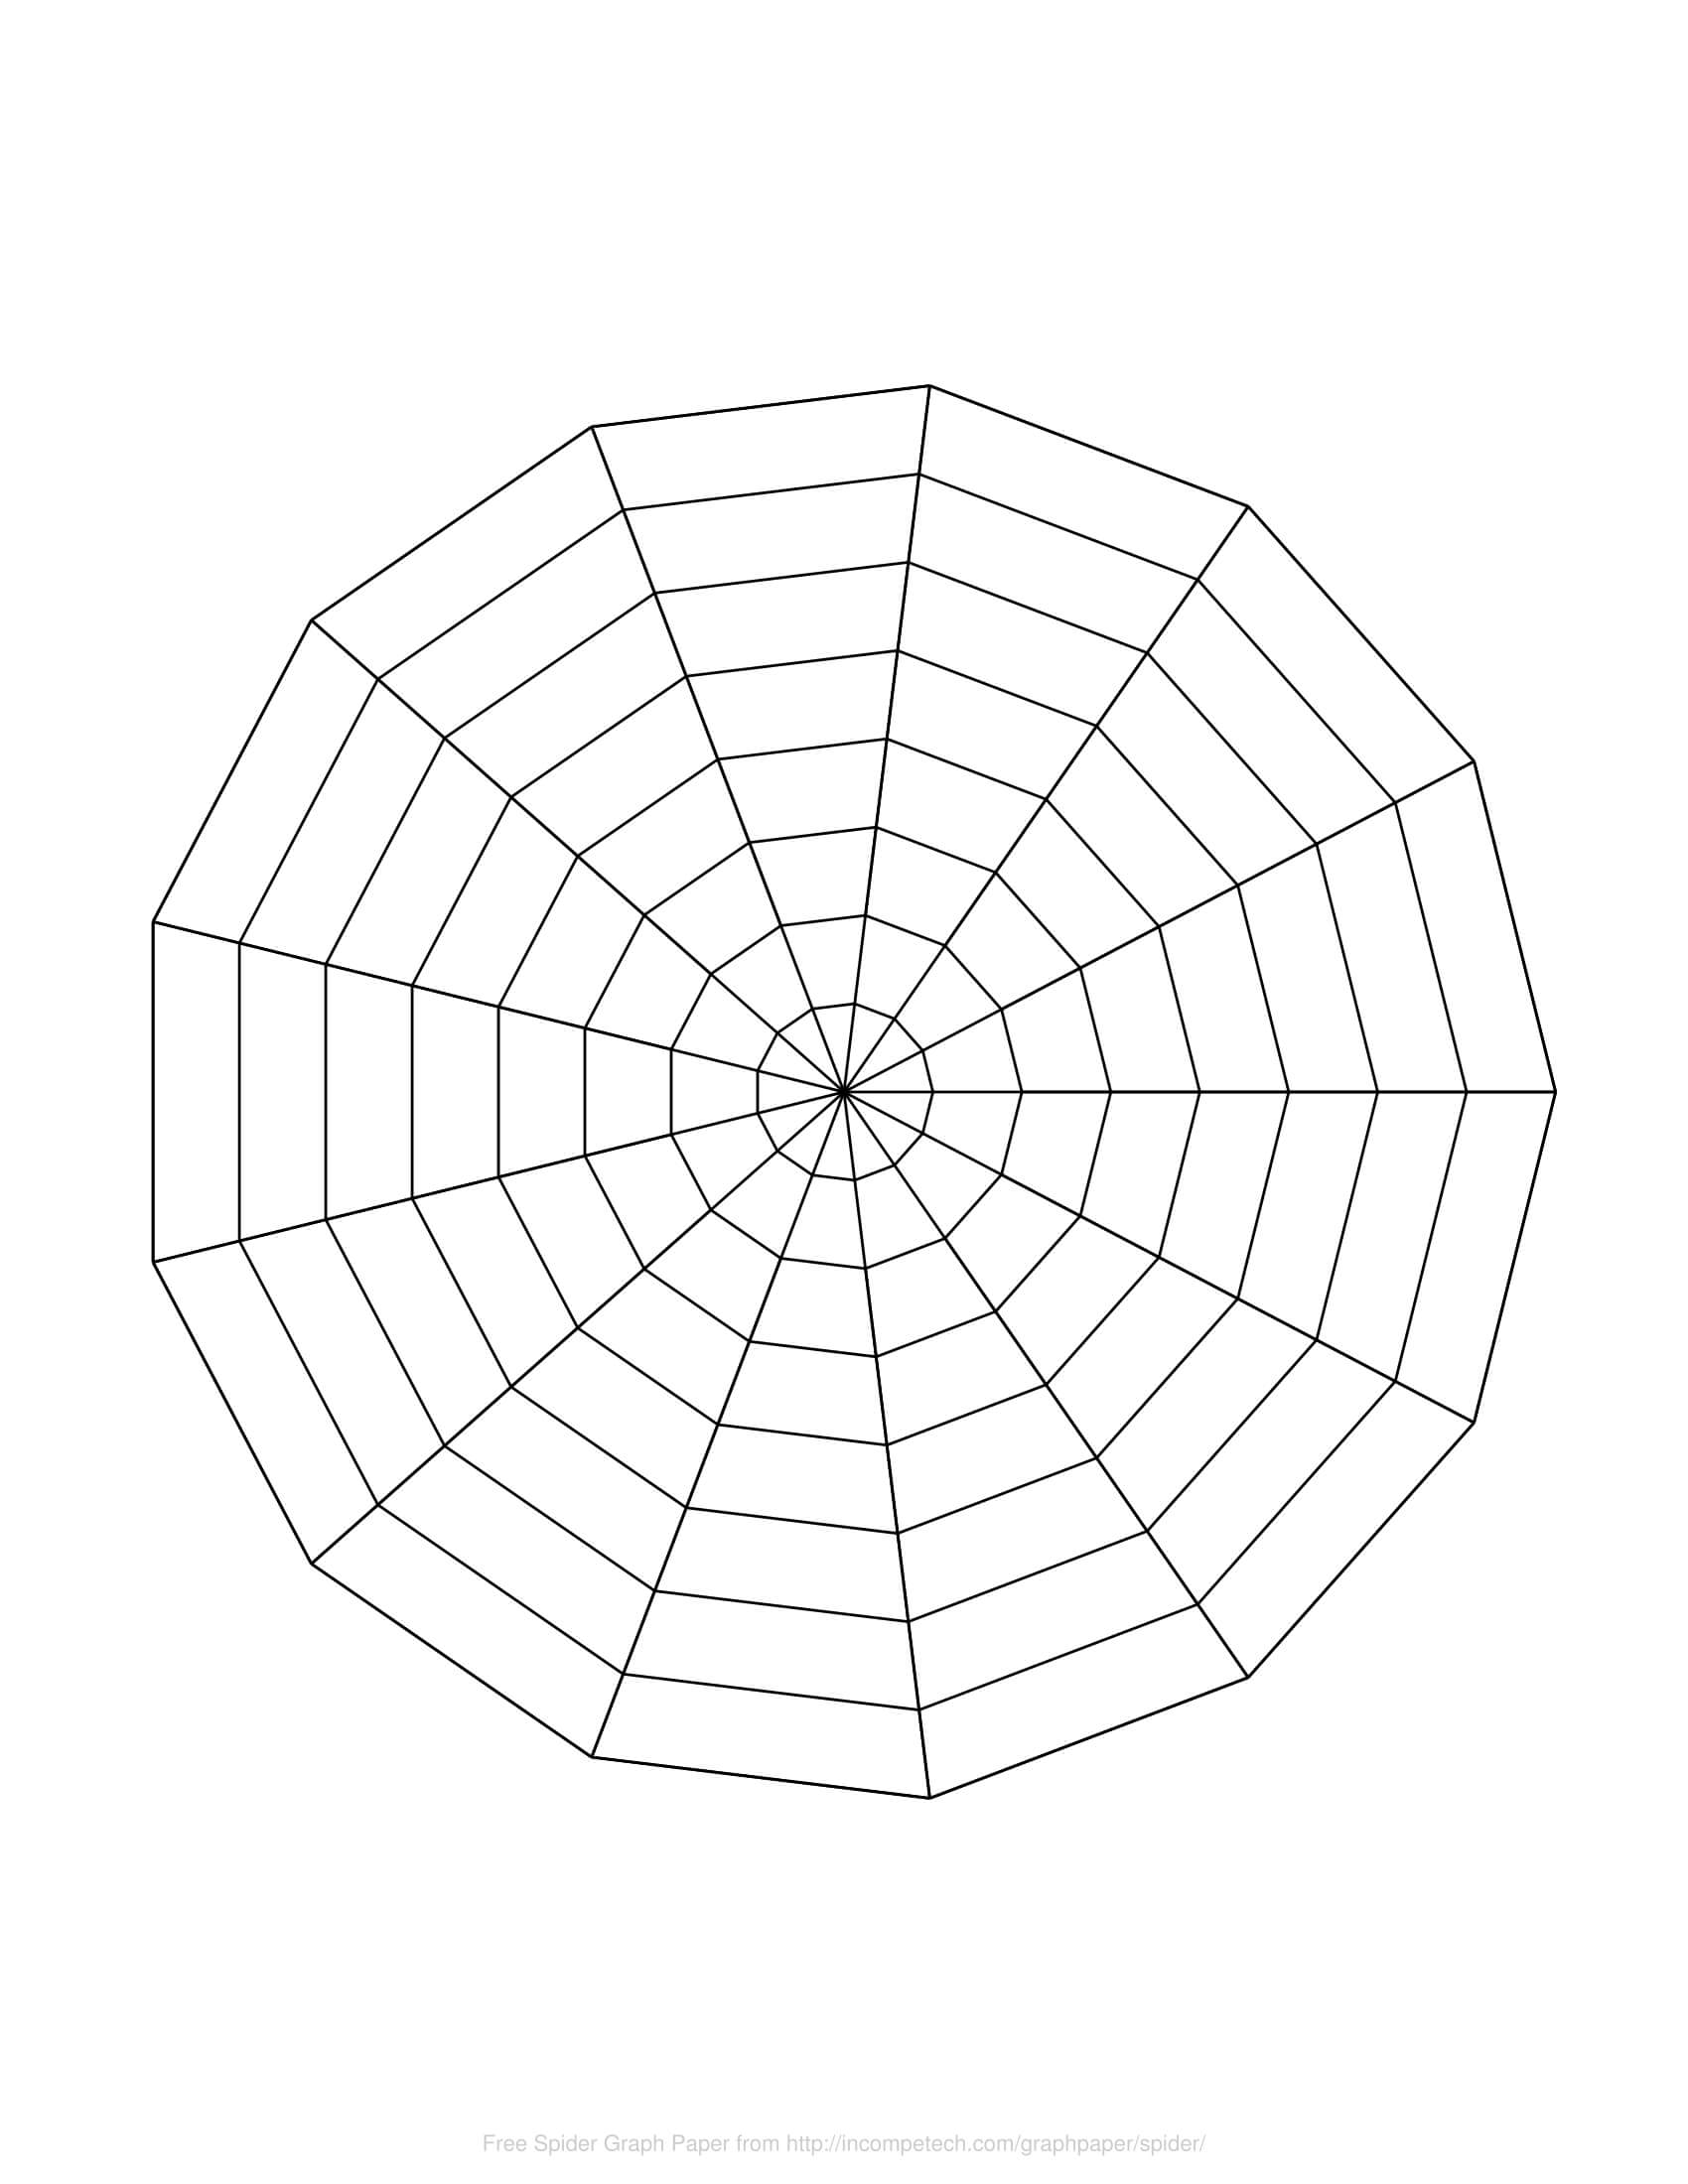 Free Online Graph Paper / Spider For Blank Radar Chart Template